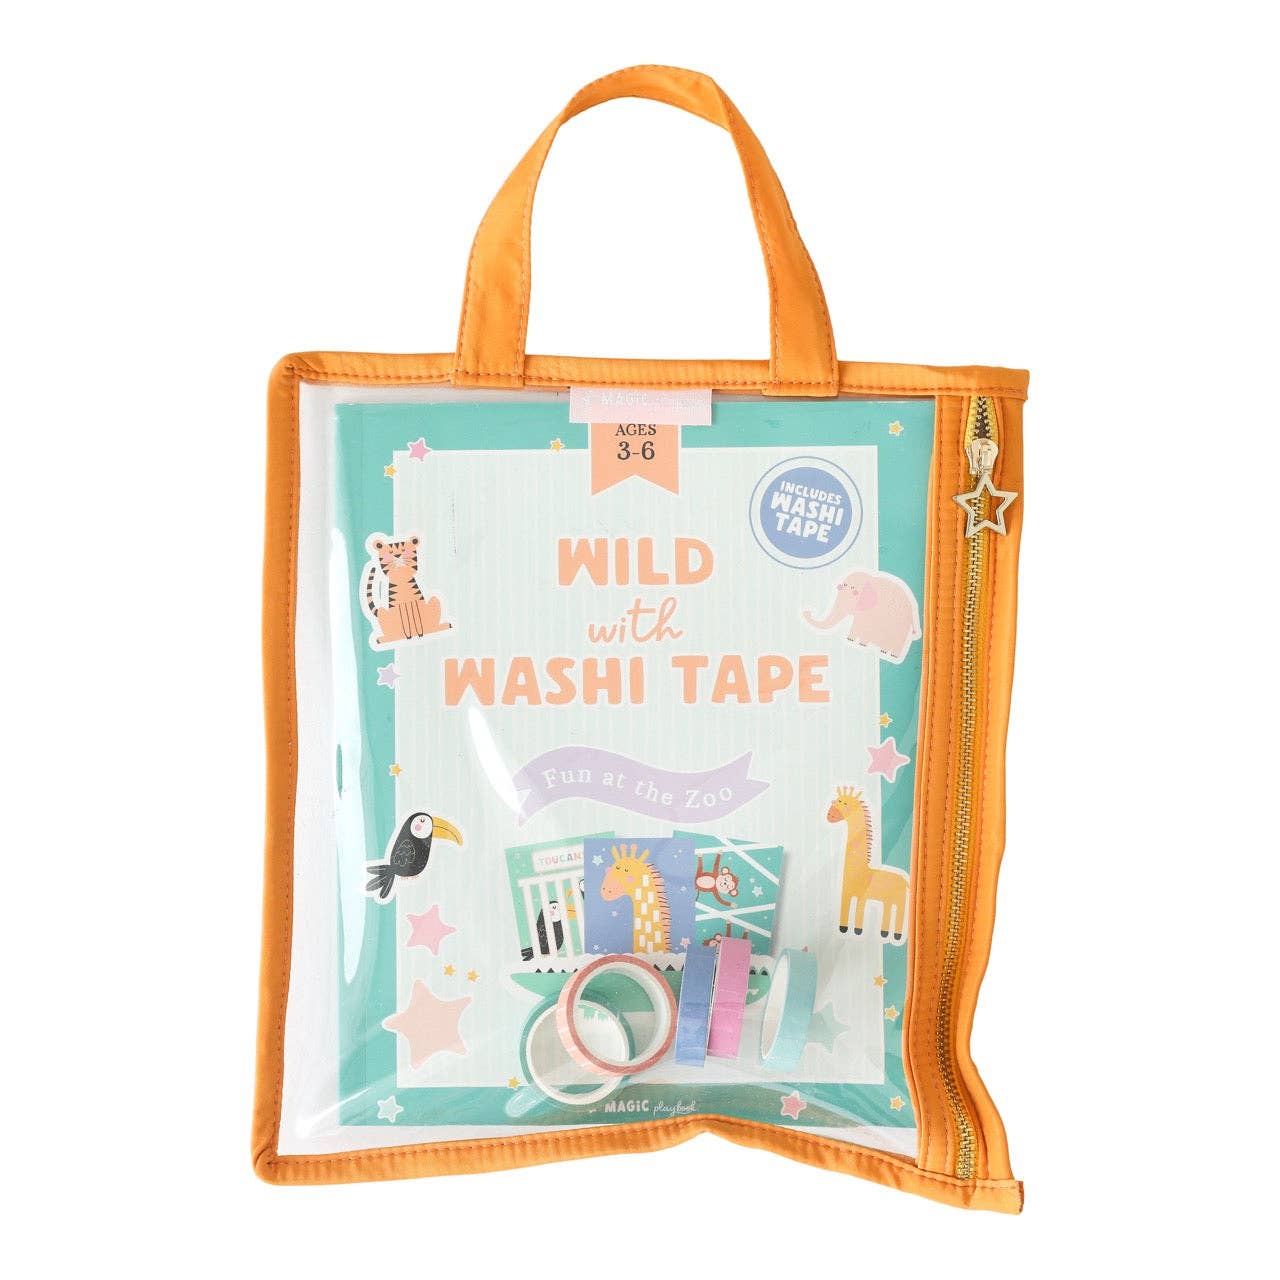 Wild with Washi Tape Activity Kit - Fun at the Zoo